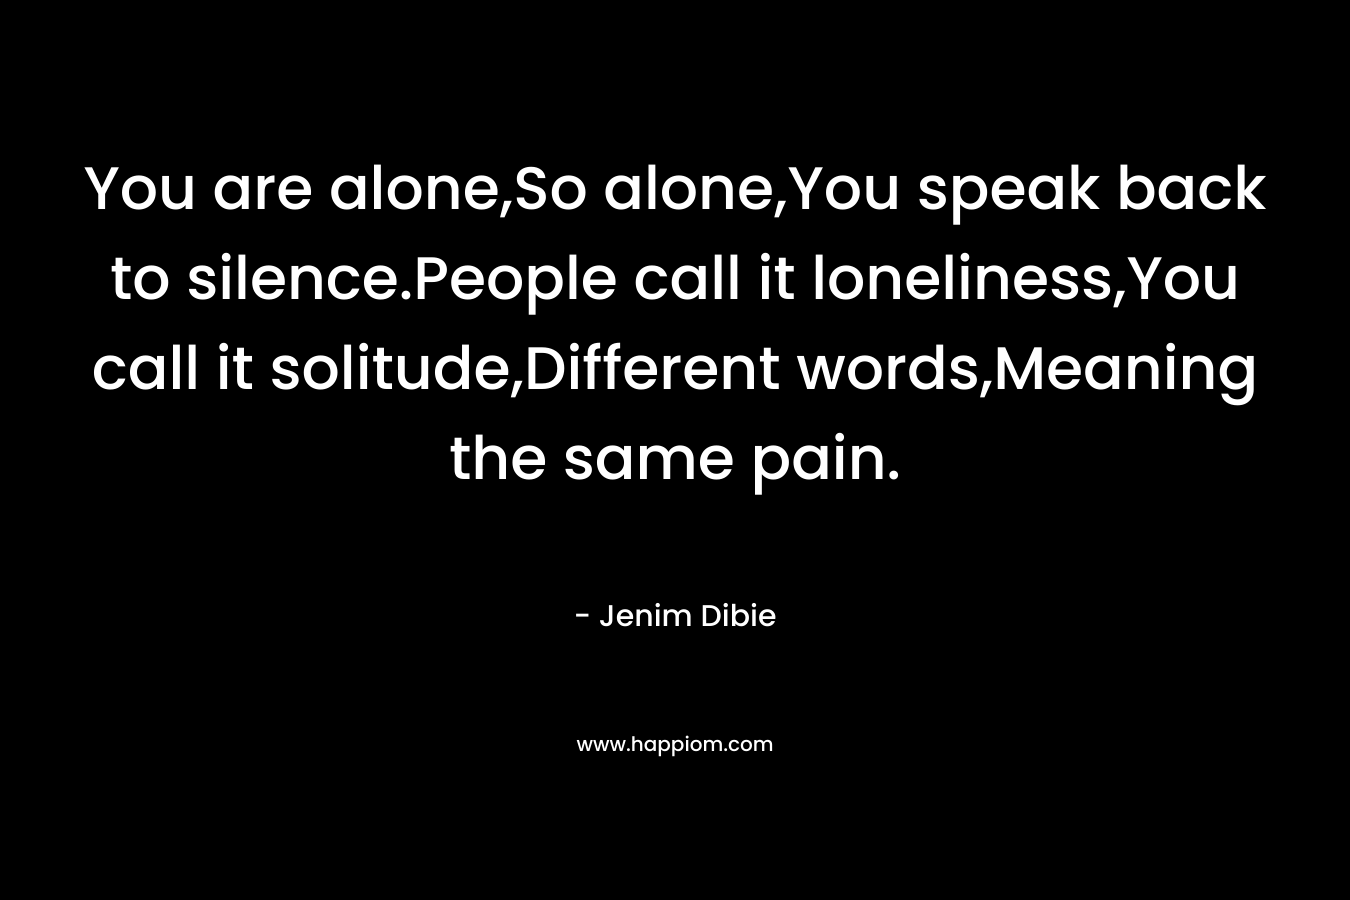 You are alone,So alone,You speak back to silence.People call it loneliness,You call it solitude,Different words,Meaning the same pain.